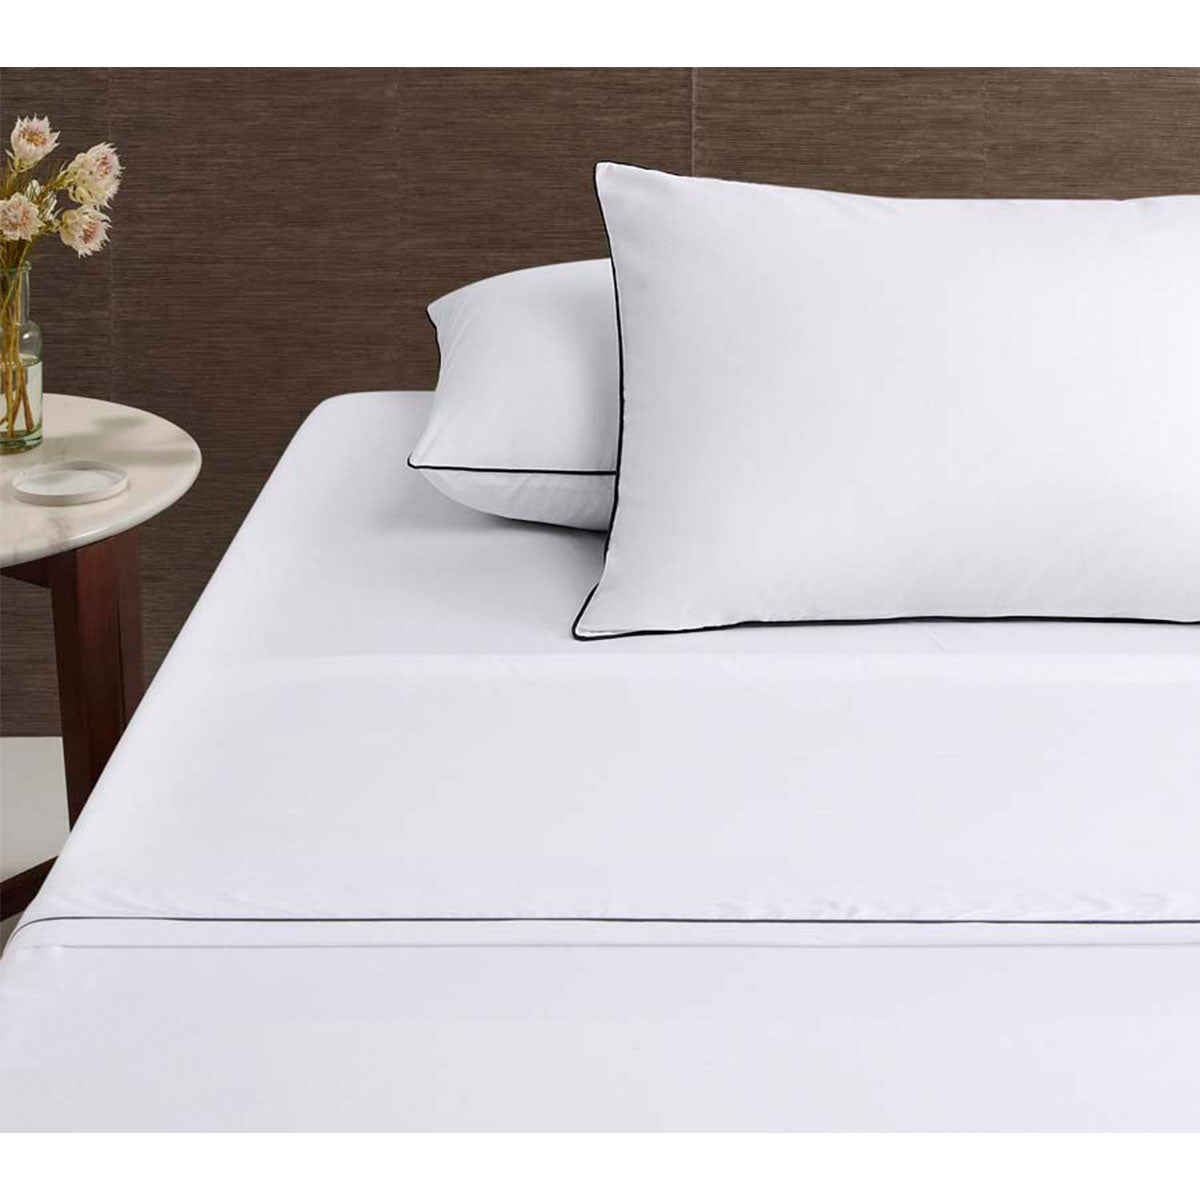 Accessorize White/Black Piped Hotel Deluxe Cotton Sheet Set - Super King | Luxury Bed Linens